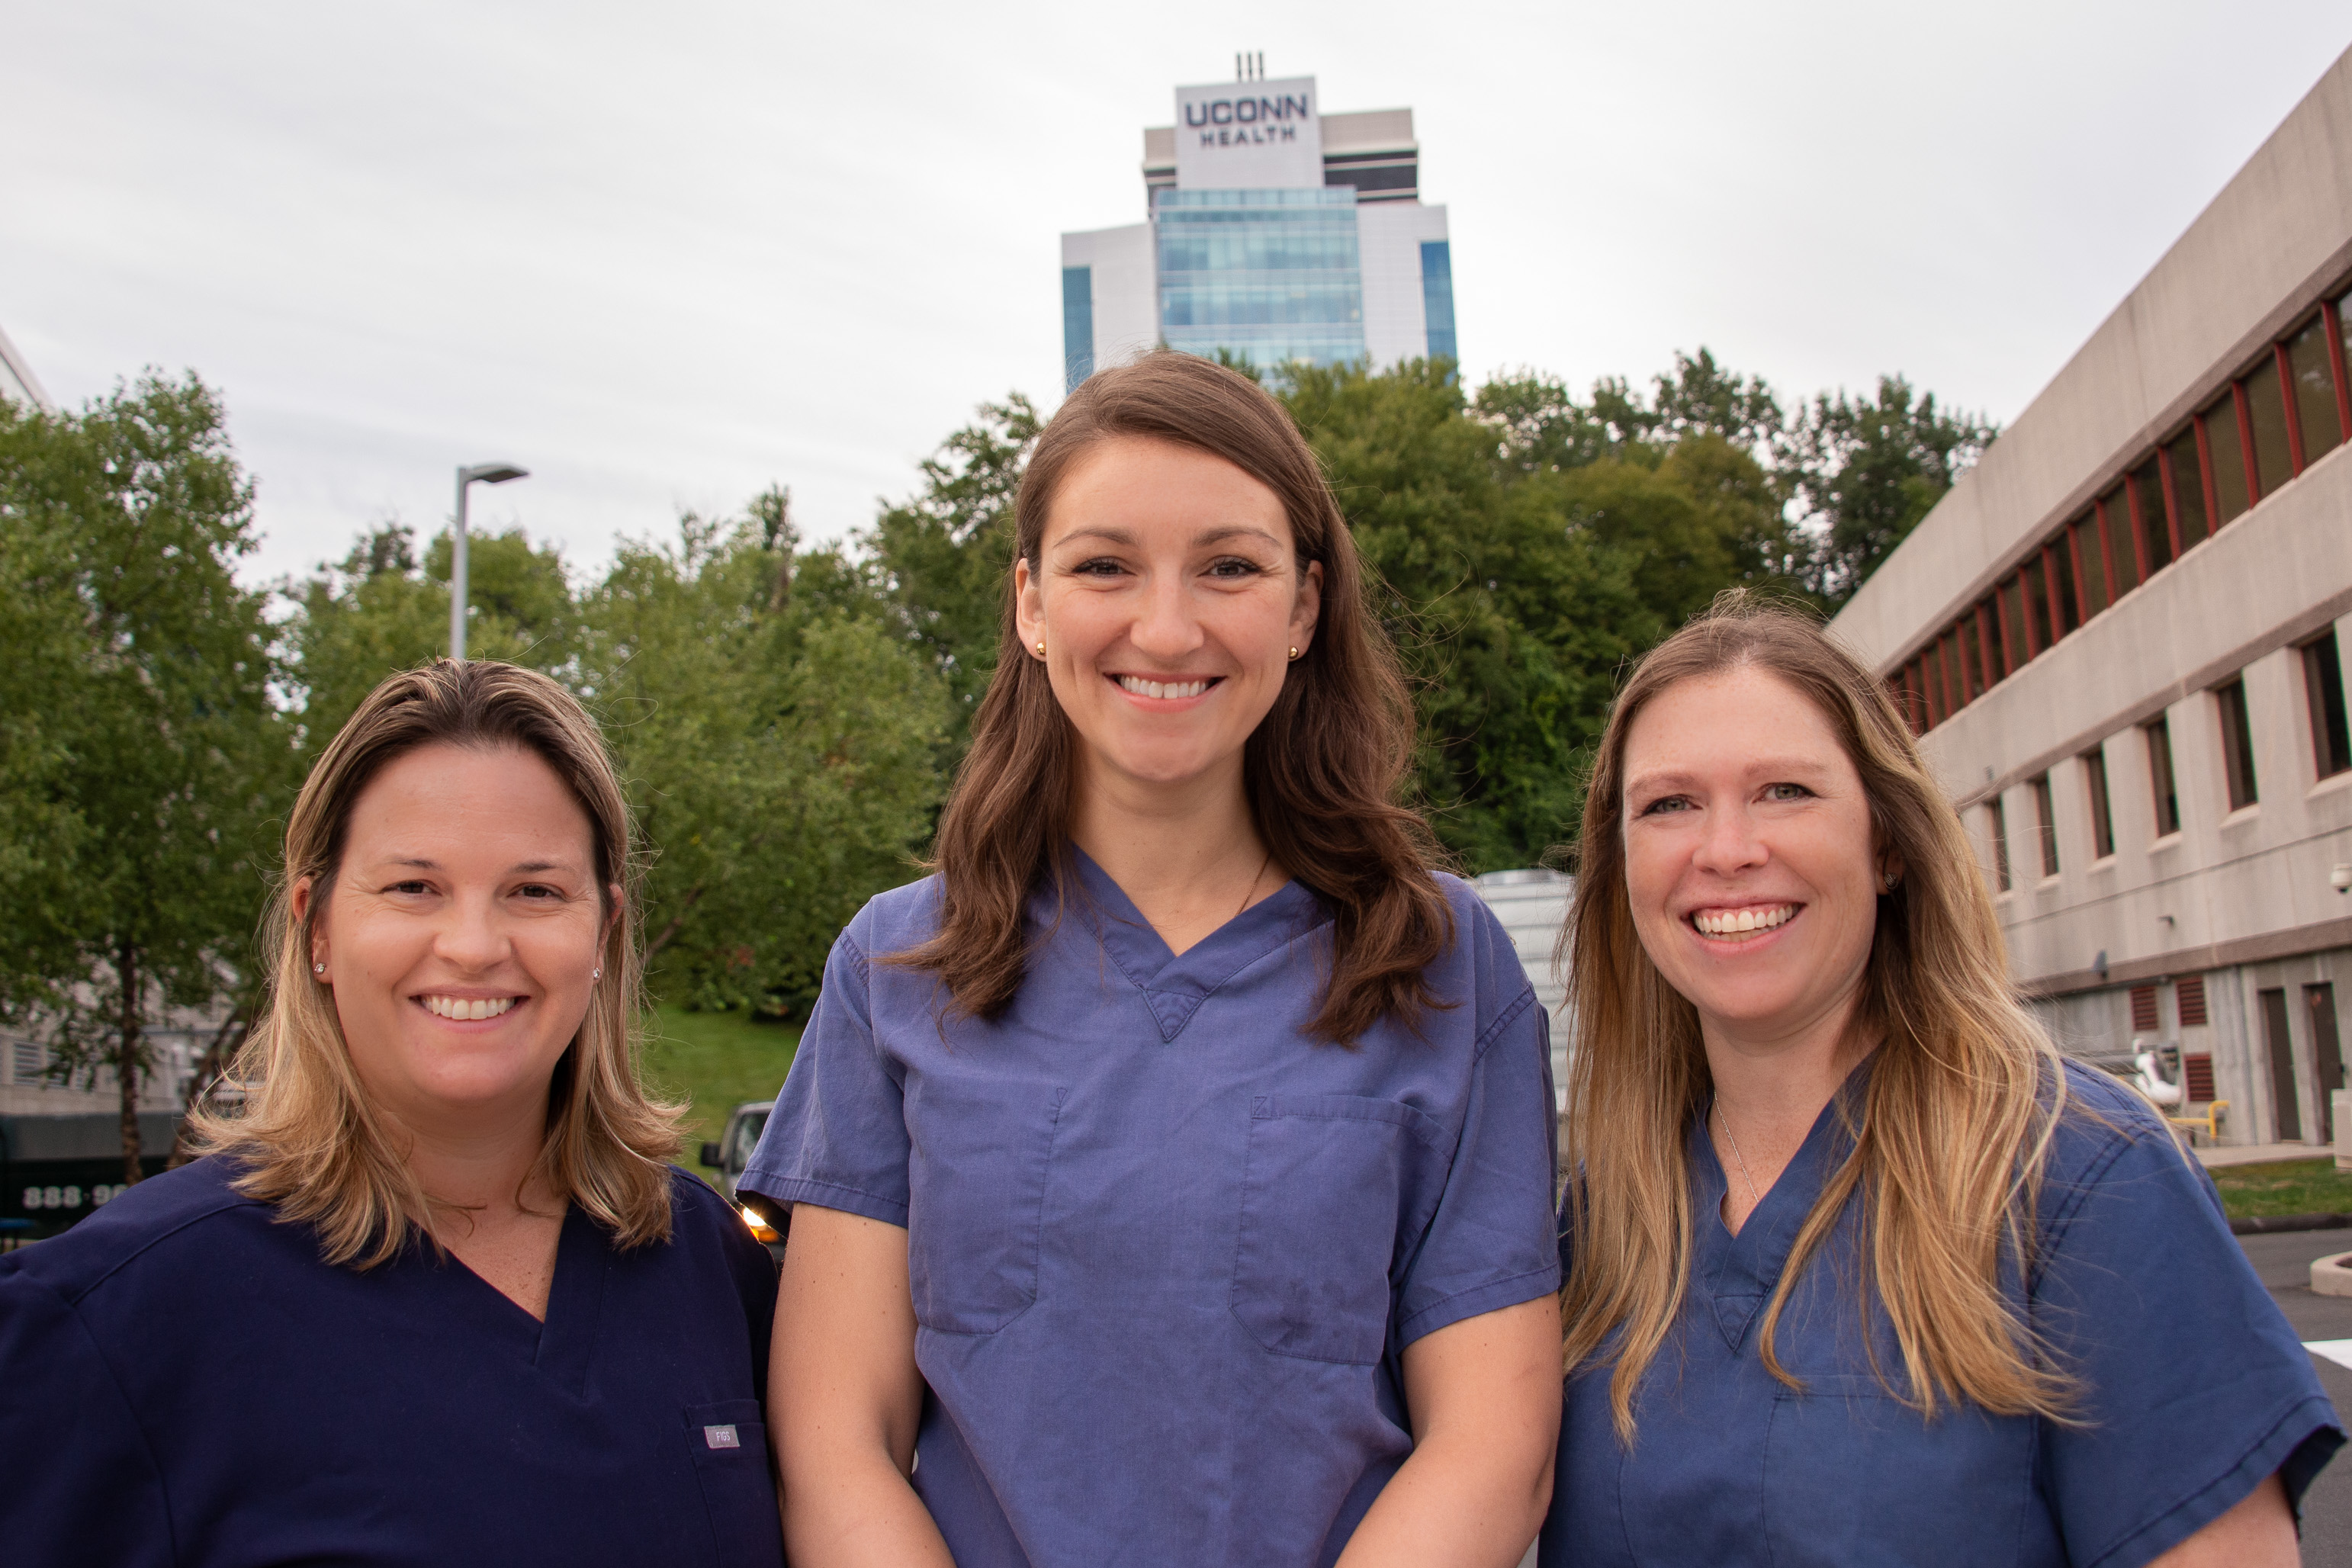 Drs. Kathy Coyner, Olga Solovyova, Lauren Geaney outside UConn Musculoskeletal Institute with University Tower in background